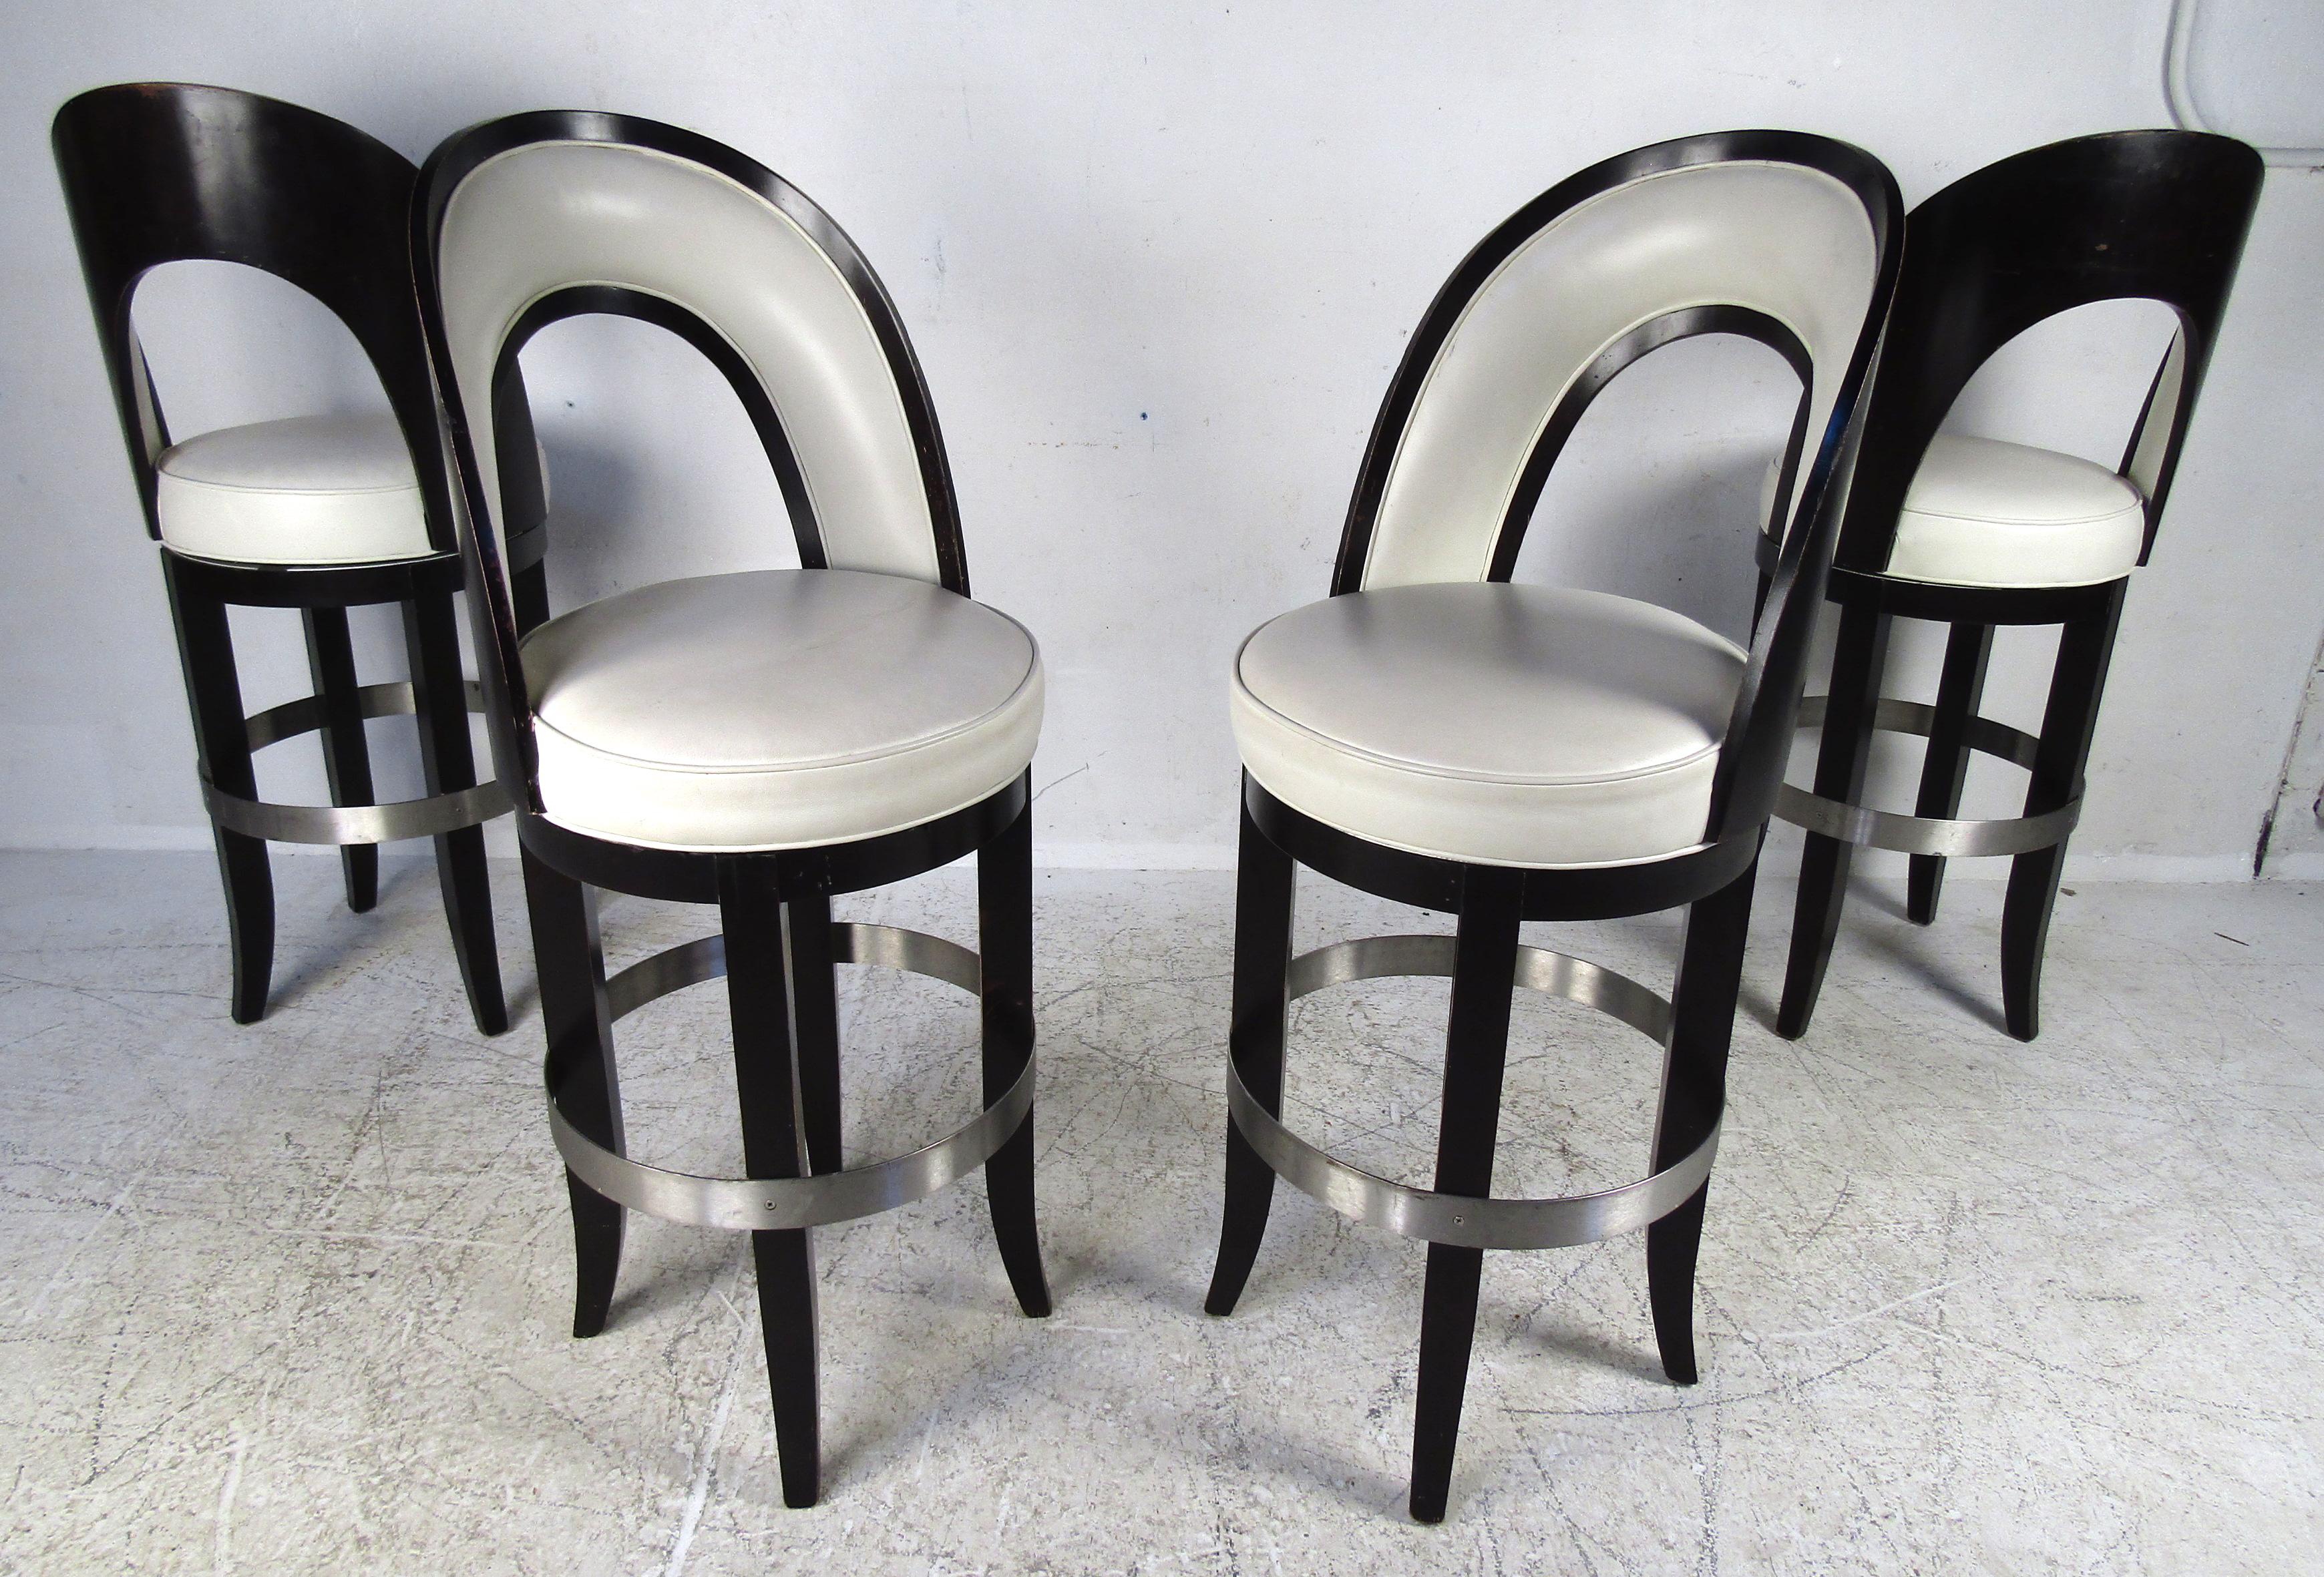 This stunning set of four vintage modern Italian barstools feature a two-tone black and white design. The overstuffed seats and backrests are covered in white vinyl. A sturdy wood frame painted in black offers the convenient ability to swivel. A